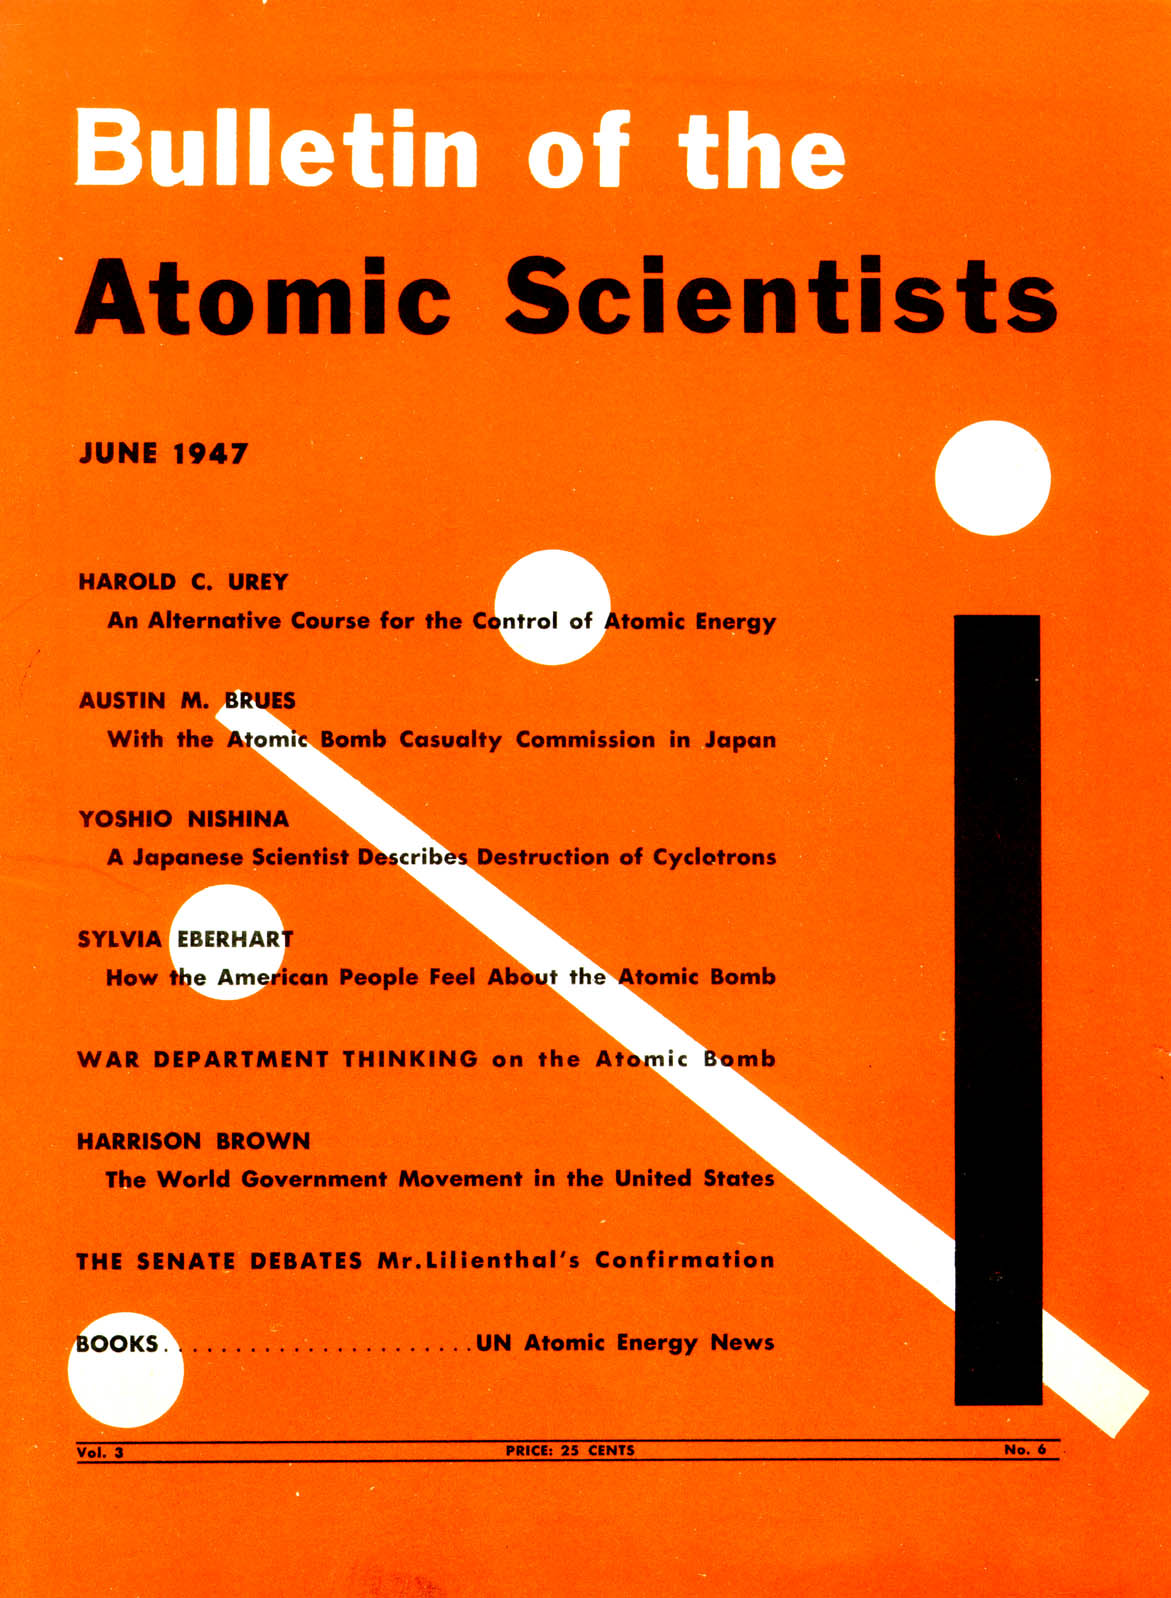 The cover of the "Bulletin of the Atomic Scientists" with Martyl Langsdorf's clock, 1947.